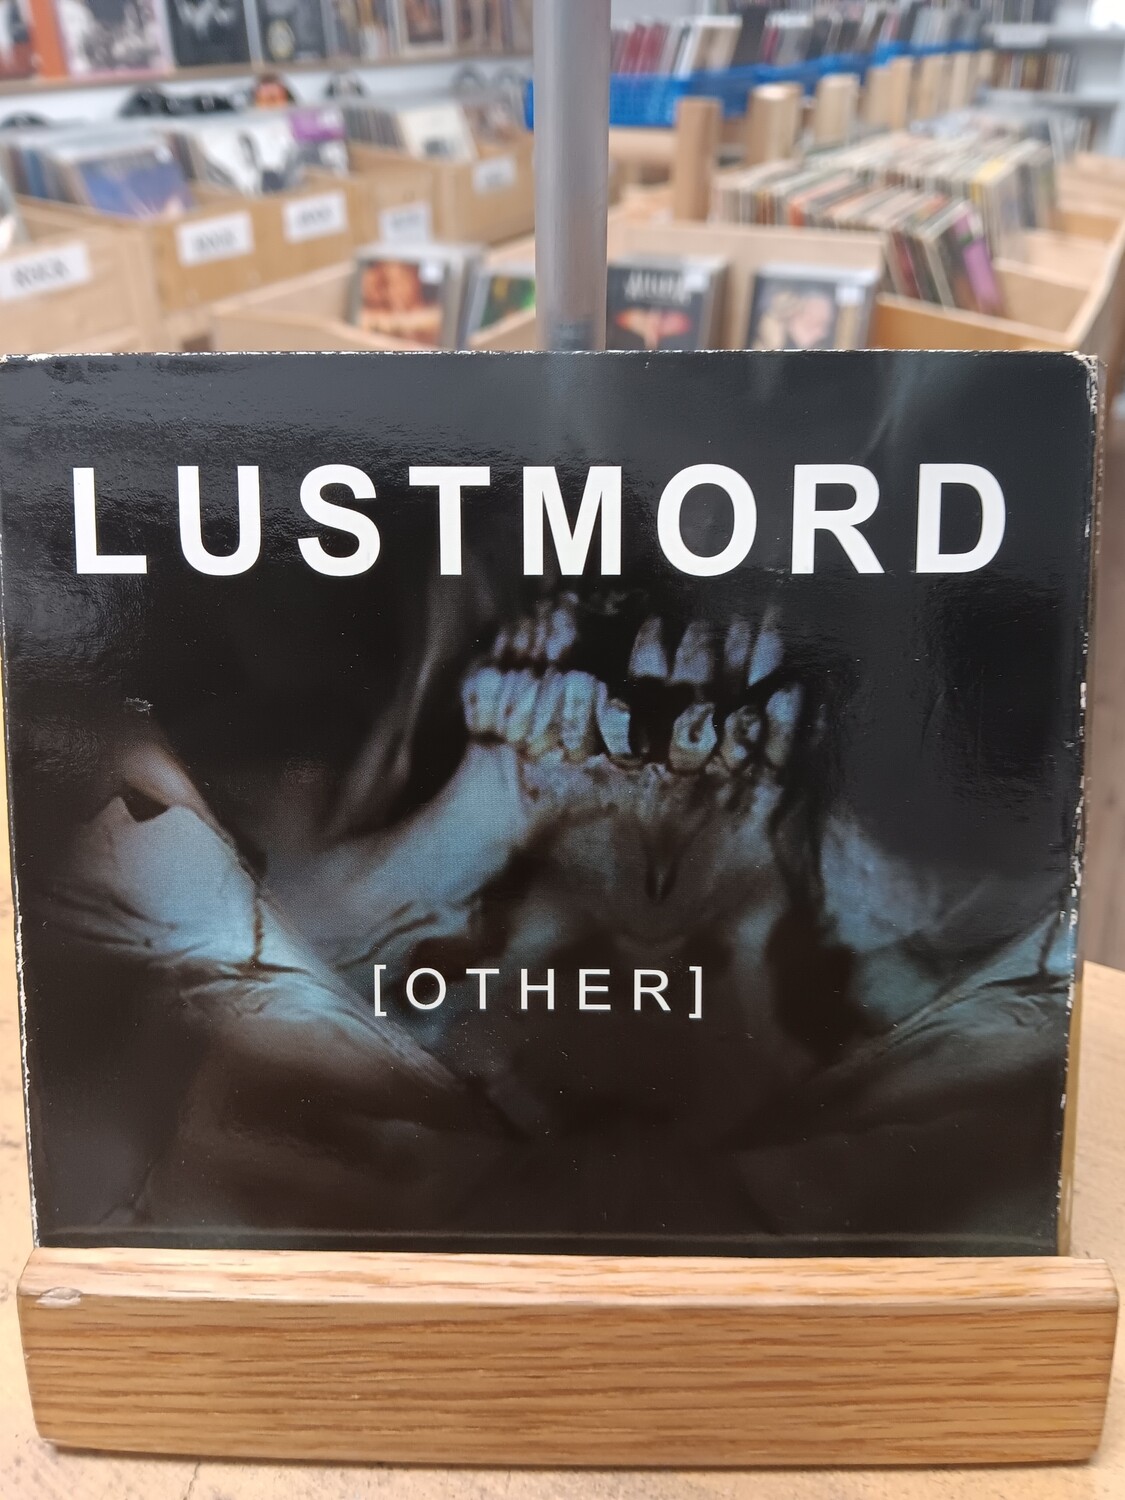 LUSTMORD - Other (CD)